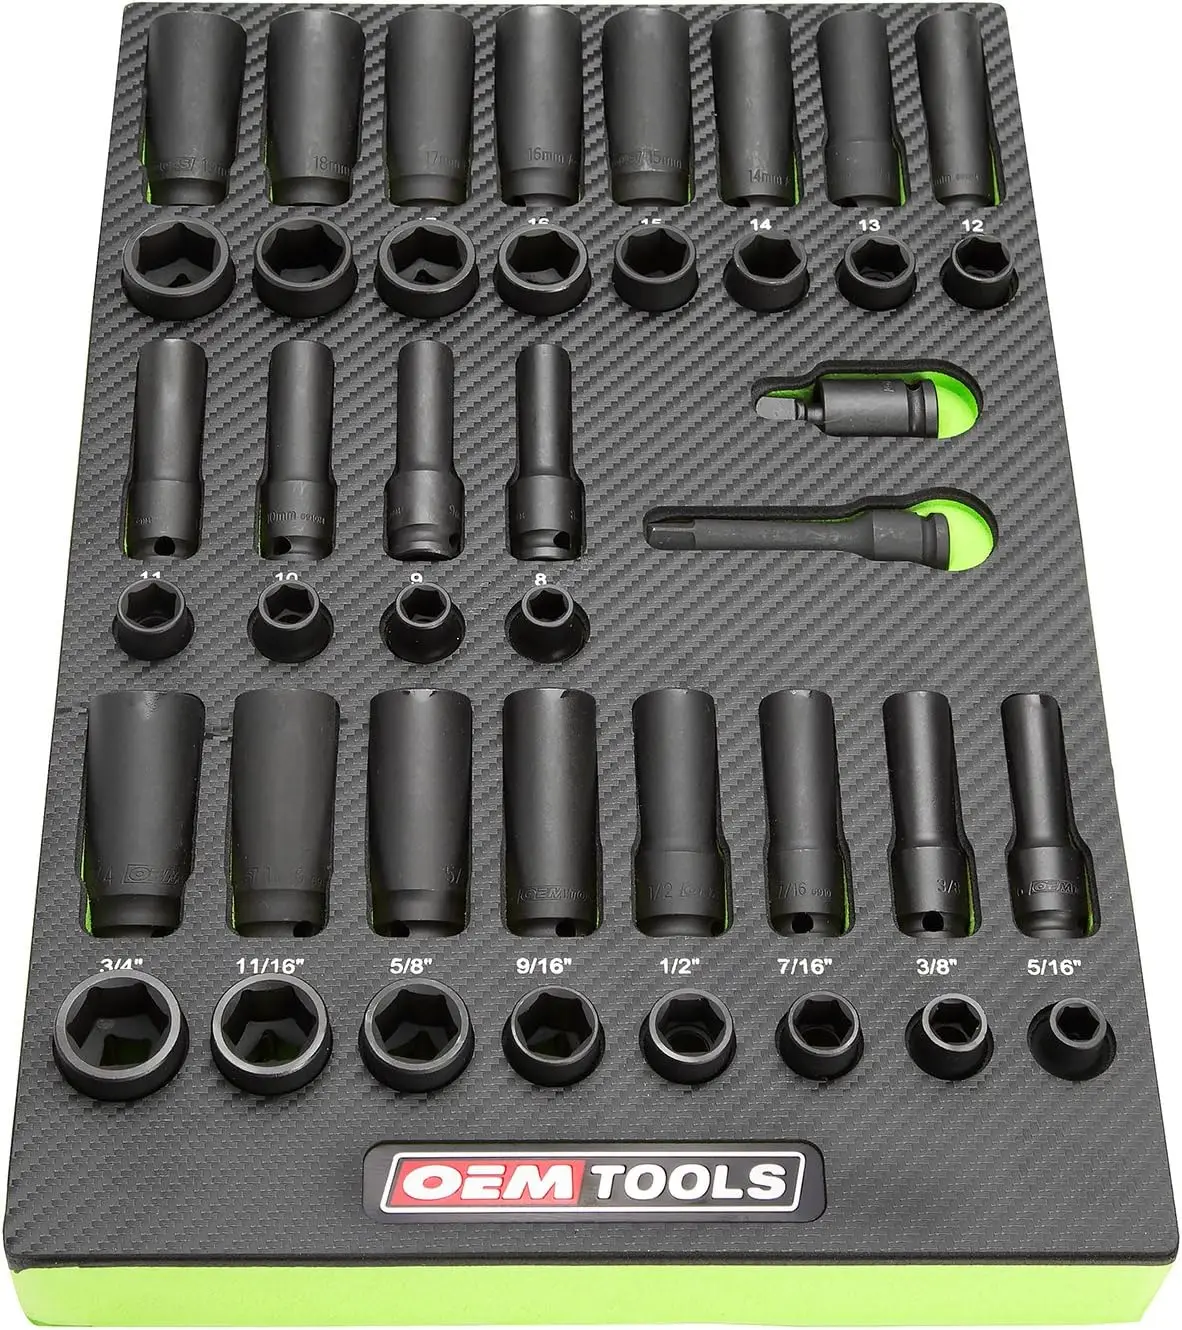 

42 Piece Socket Set, 3/8 Drive, Metric and SAE Socket Set With Shallow And Deep Sockets For Auto Repairs, Includes Custom Tray